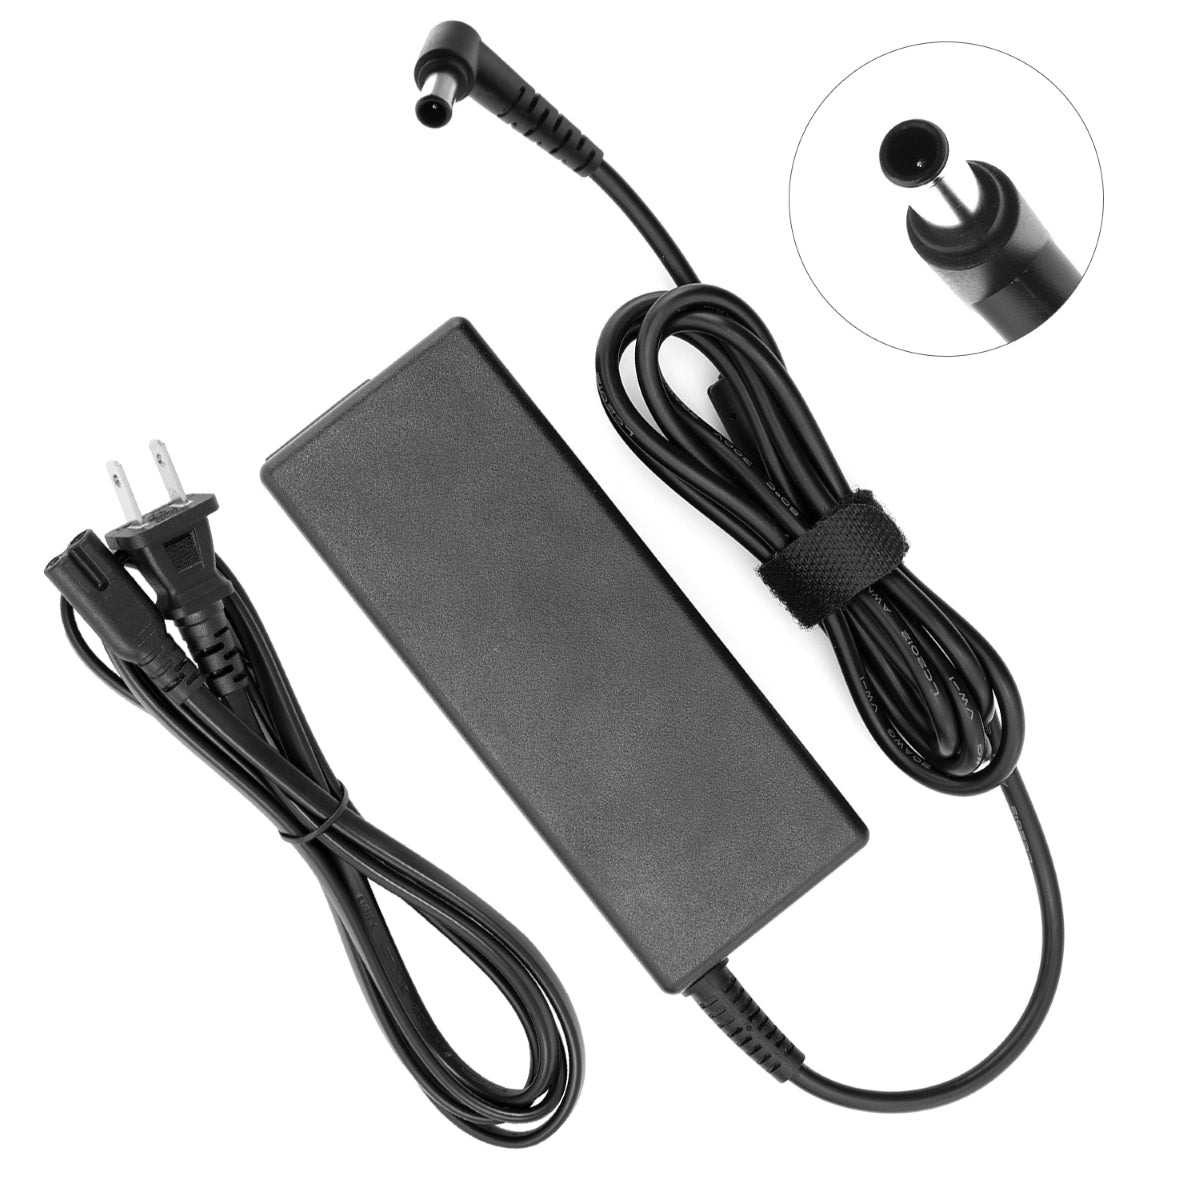 Compatible Replacement Fujitsu Lifebook P7120d Charger